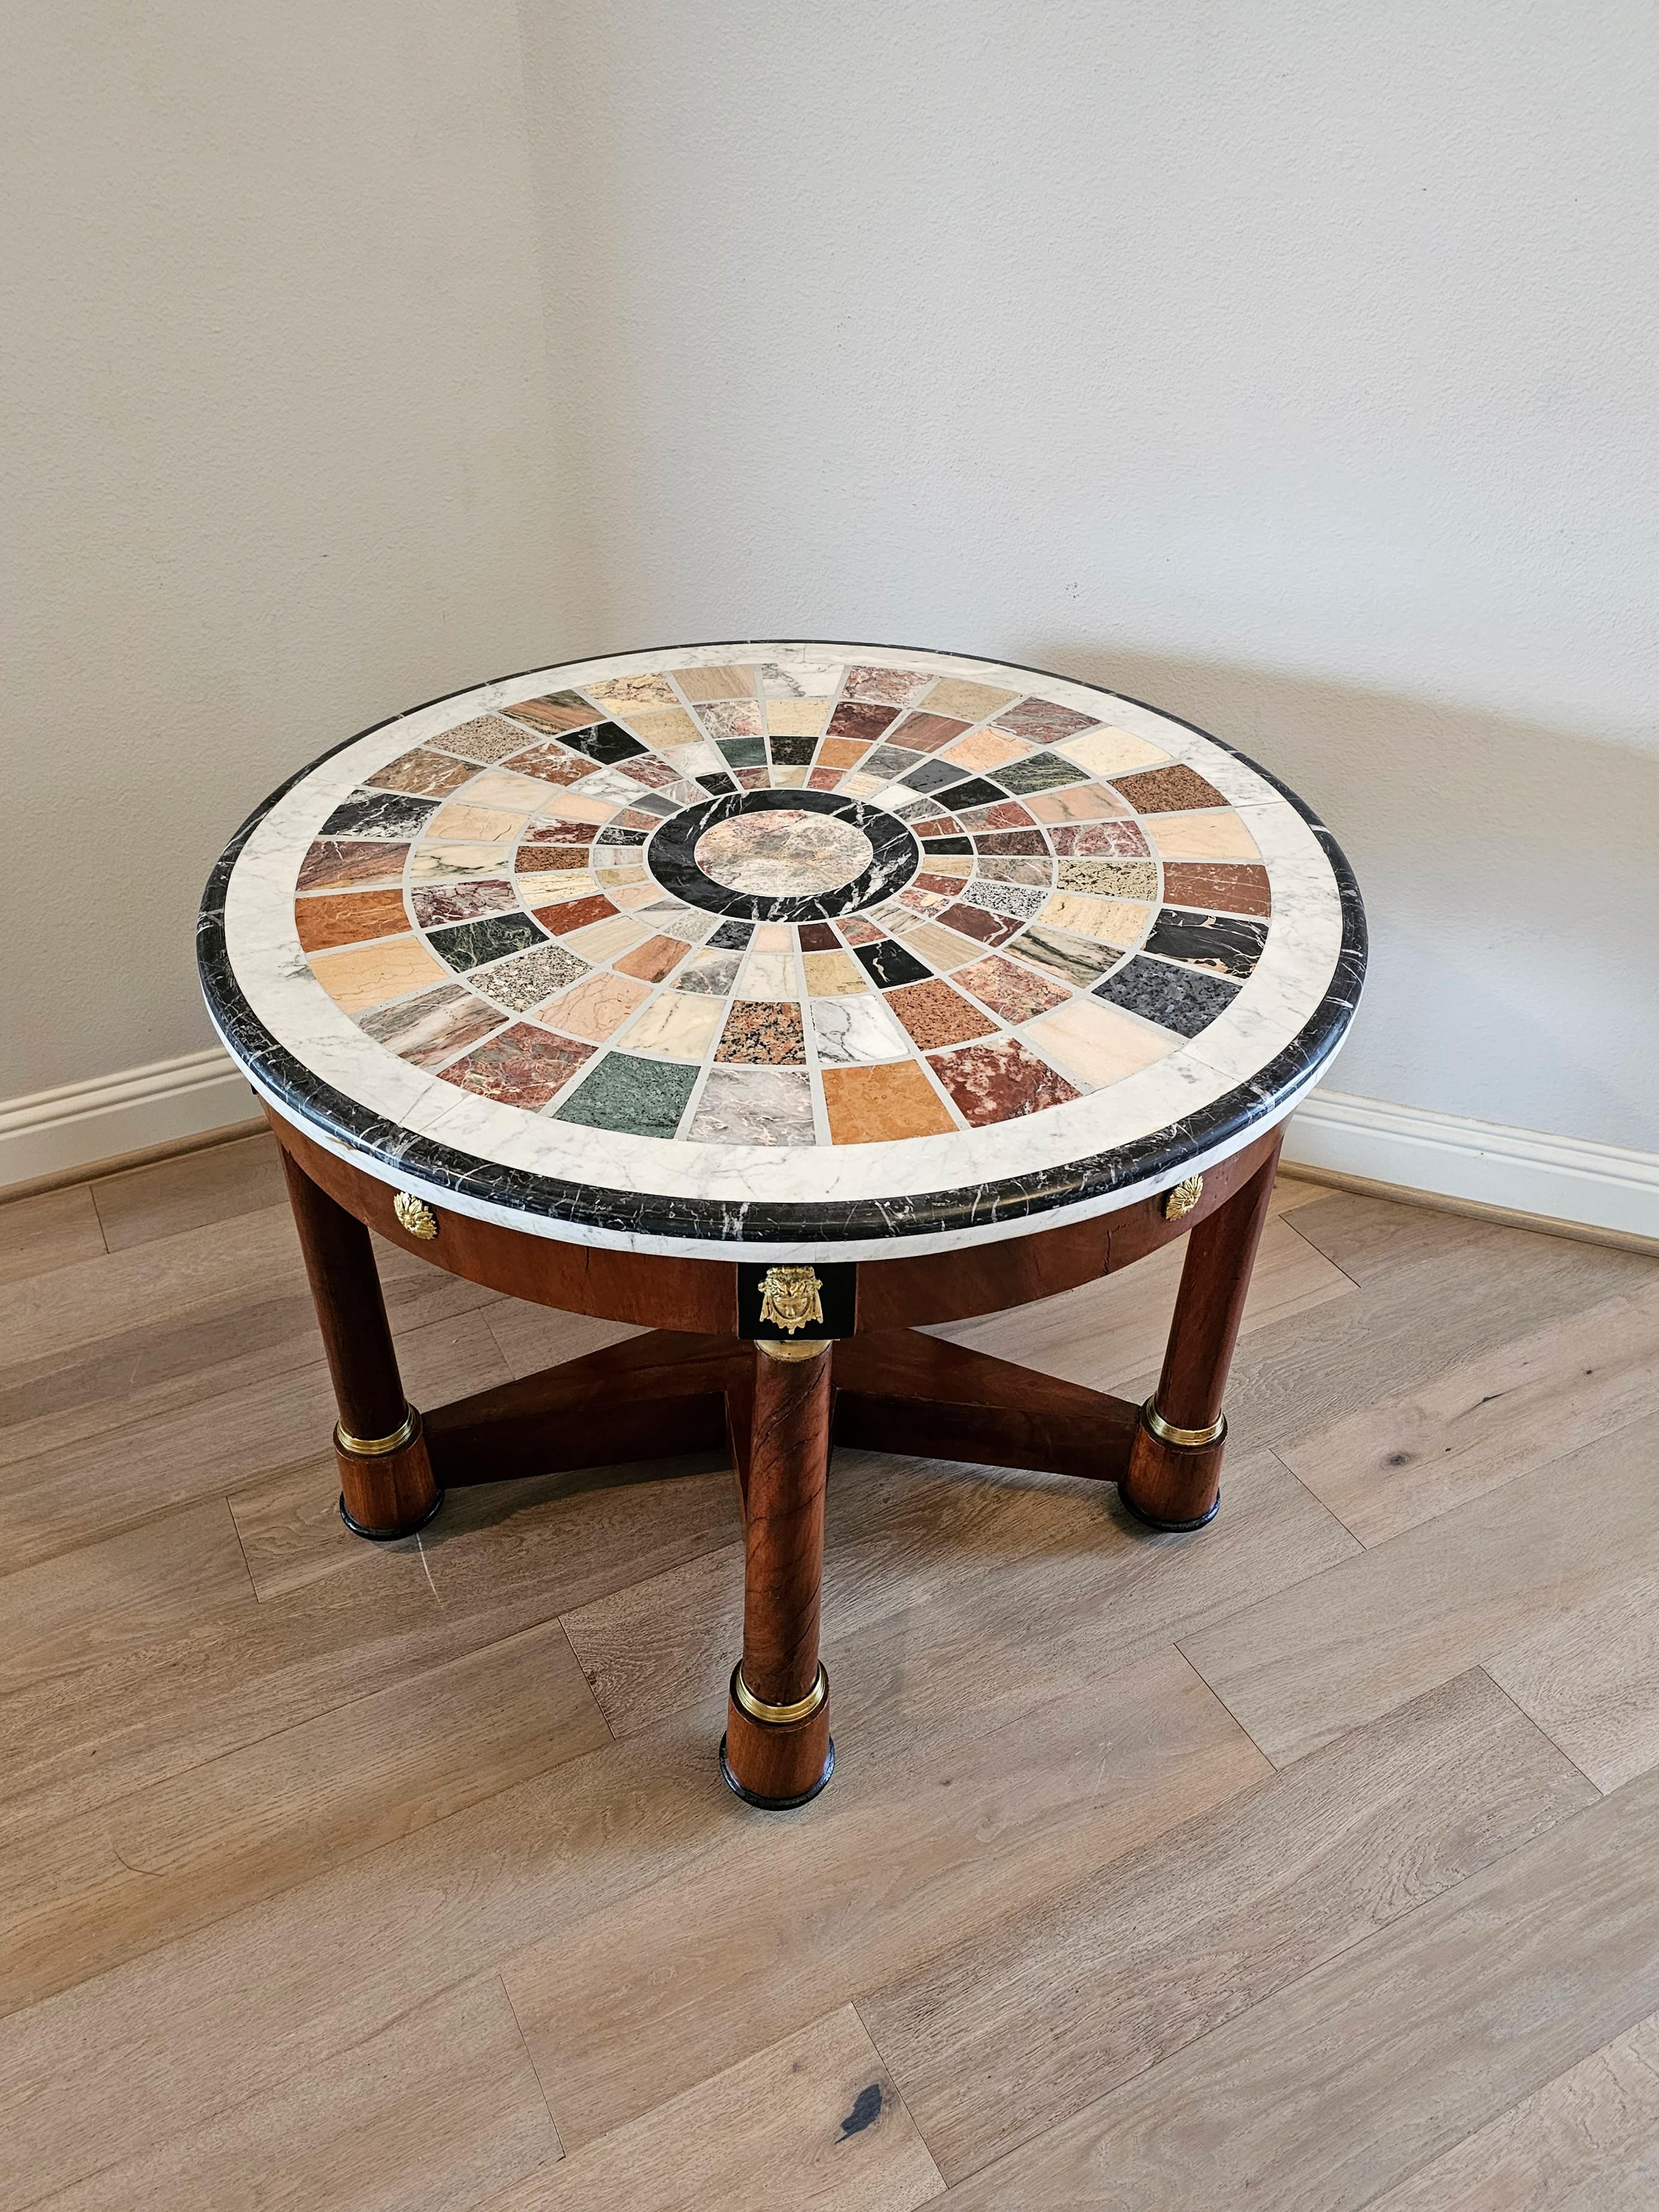 A stunning vintage Italian Empire Grand Tour style specimen marble 'pietra dura' table.

Topped with a spectacular exhibition quality round specimen marble slab, featuring a large variety of rare, exotic, and decorative marbles, hard stones,